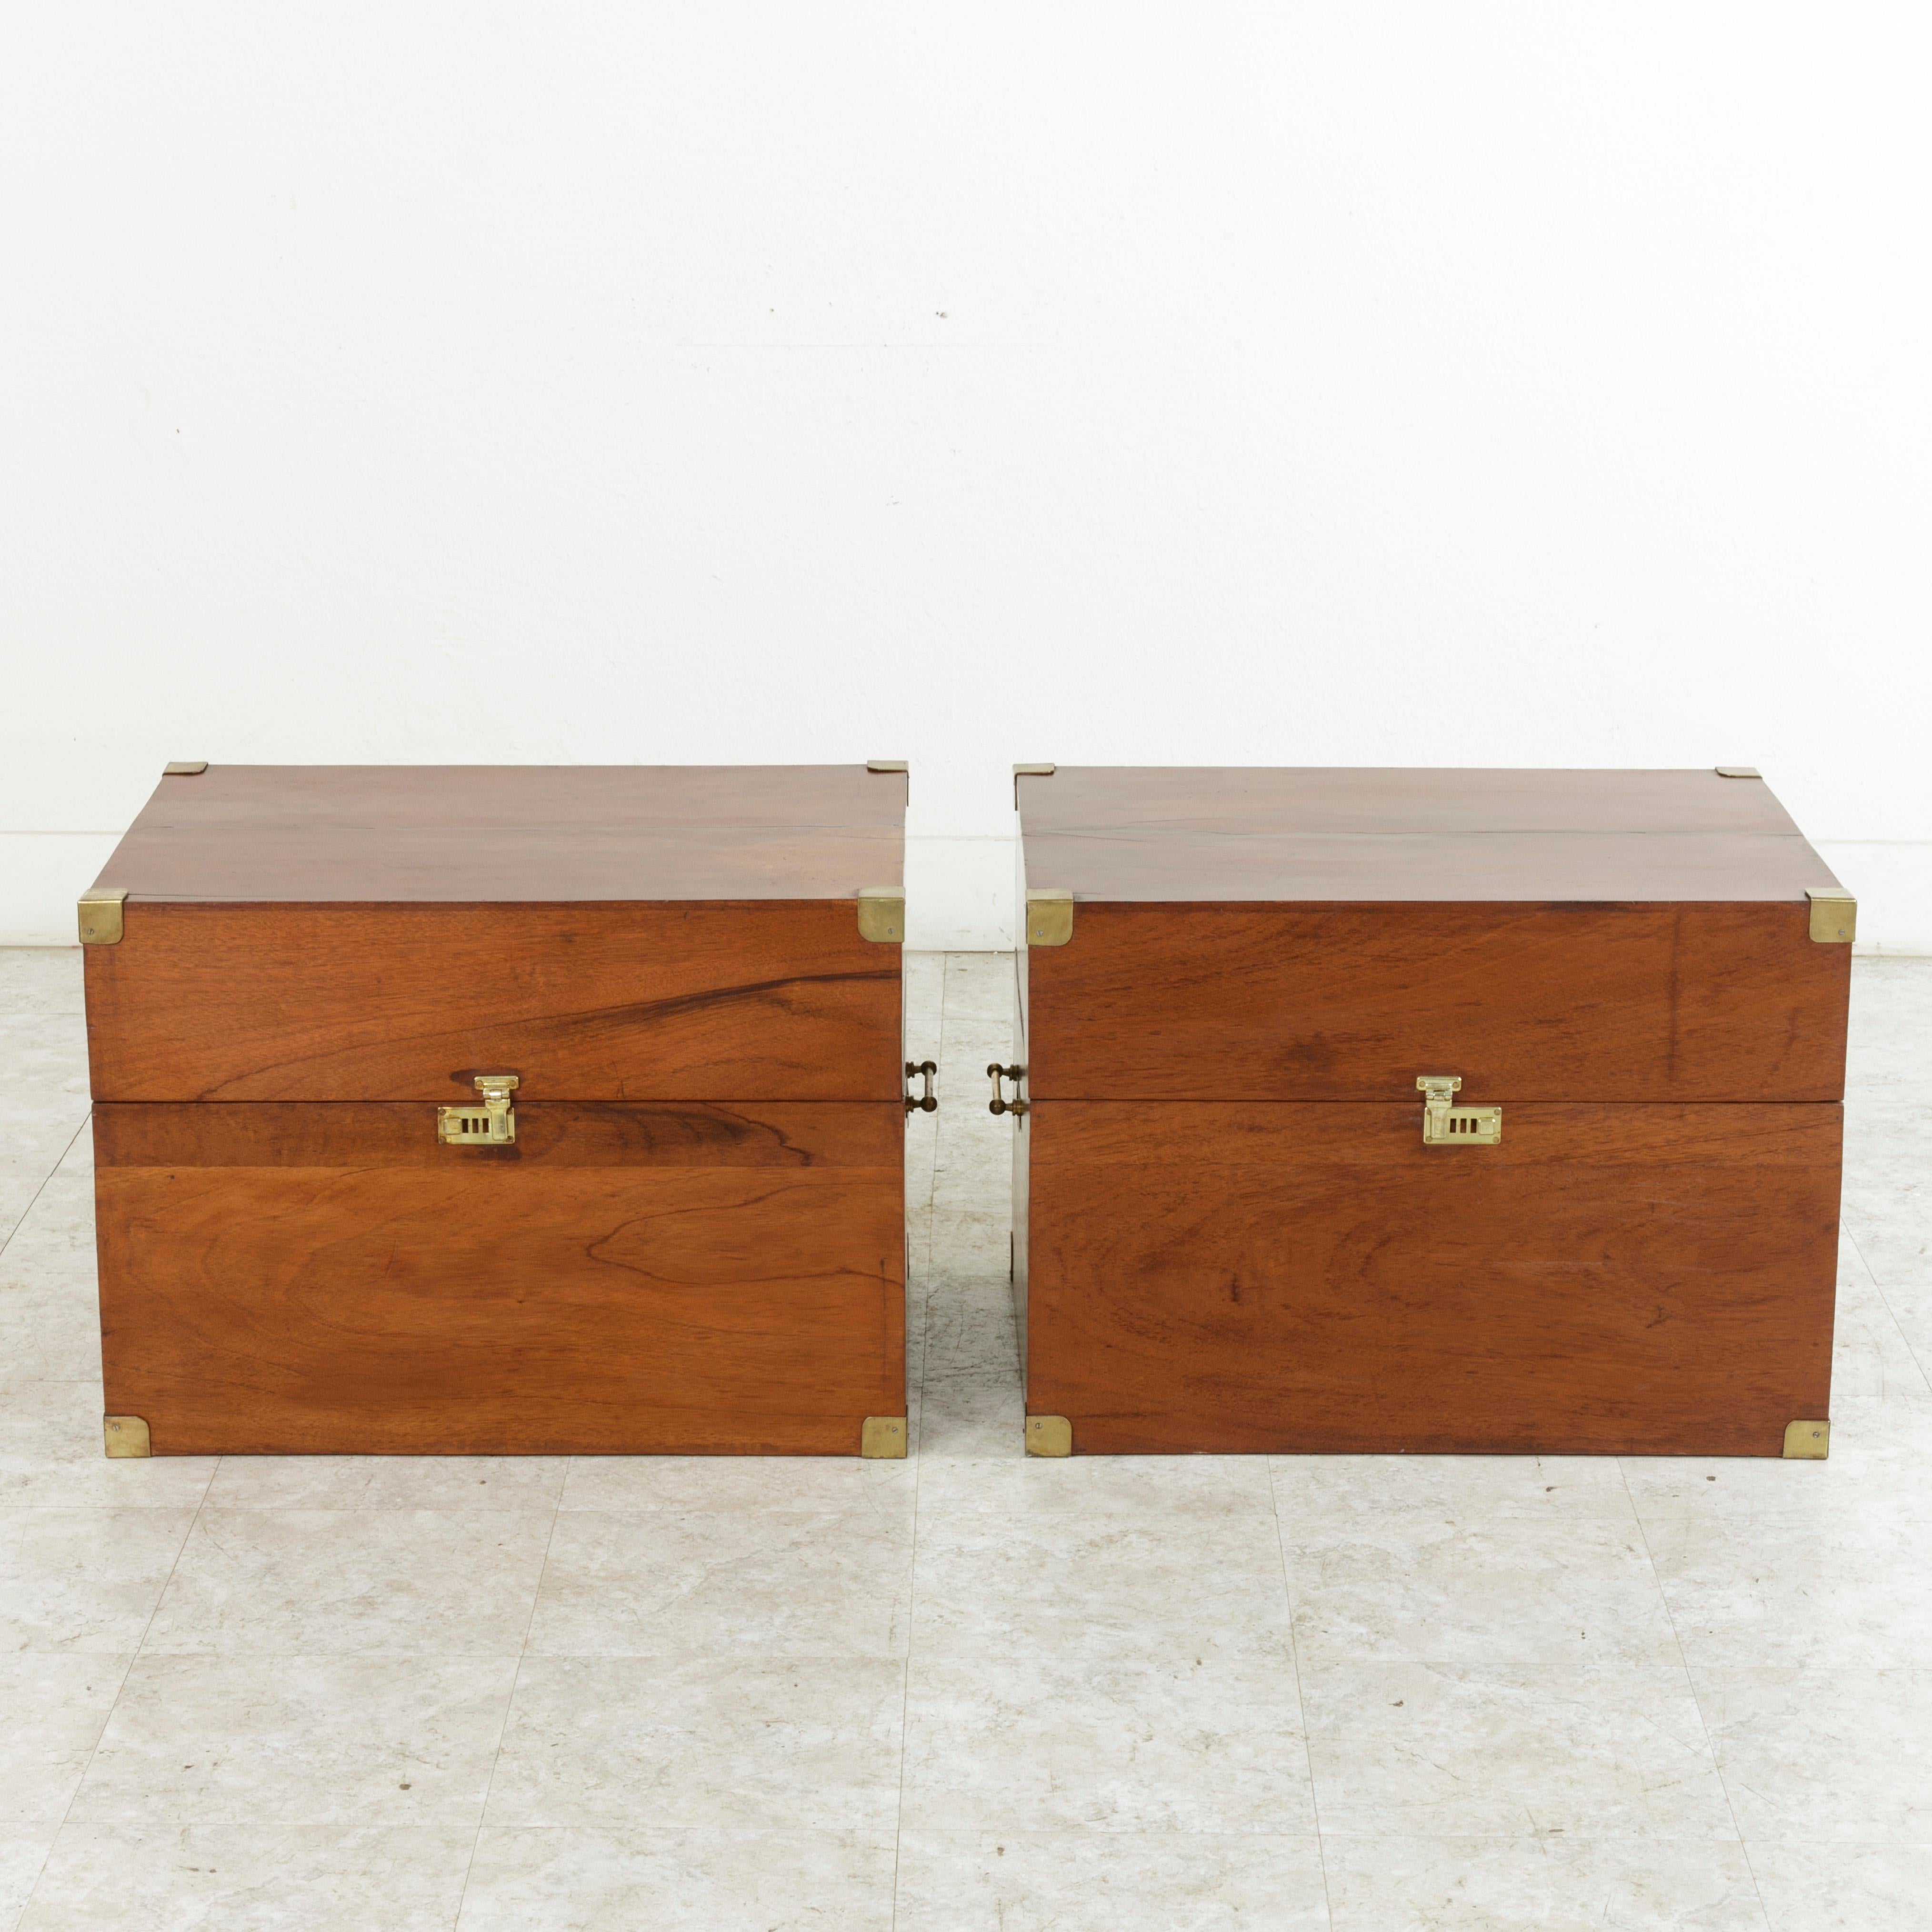 This pair of mid-20th century French naval officer's traveling trunks is constructed of solid mahogany and features brass corners, handles, and latches. Each chest has its own unique interior with leather straps, one with a lift out tray lined in